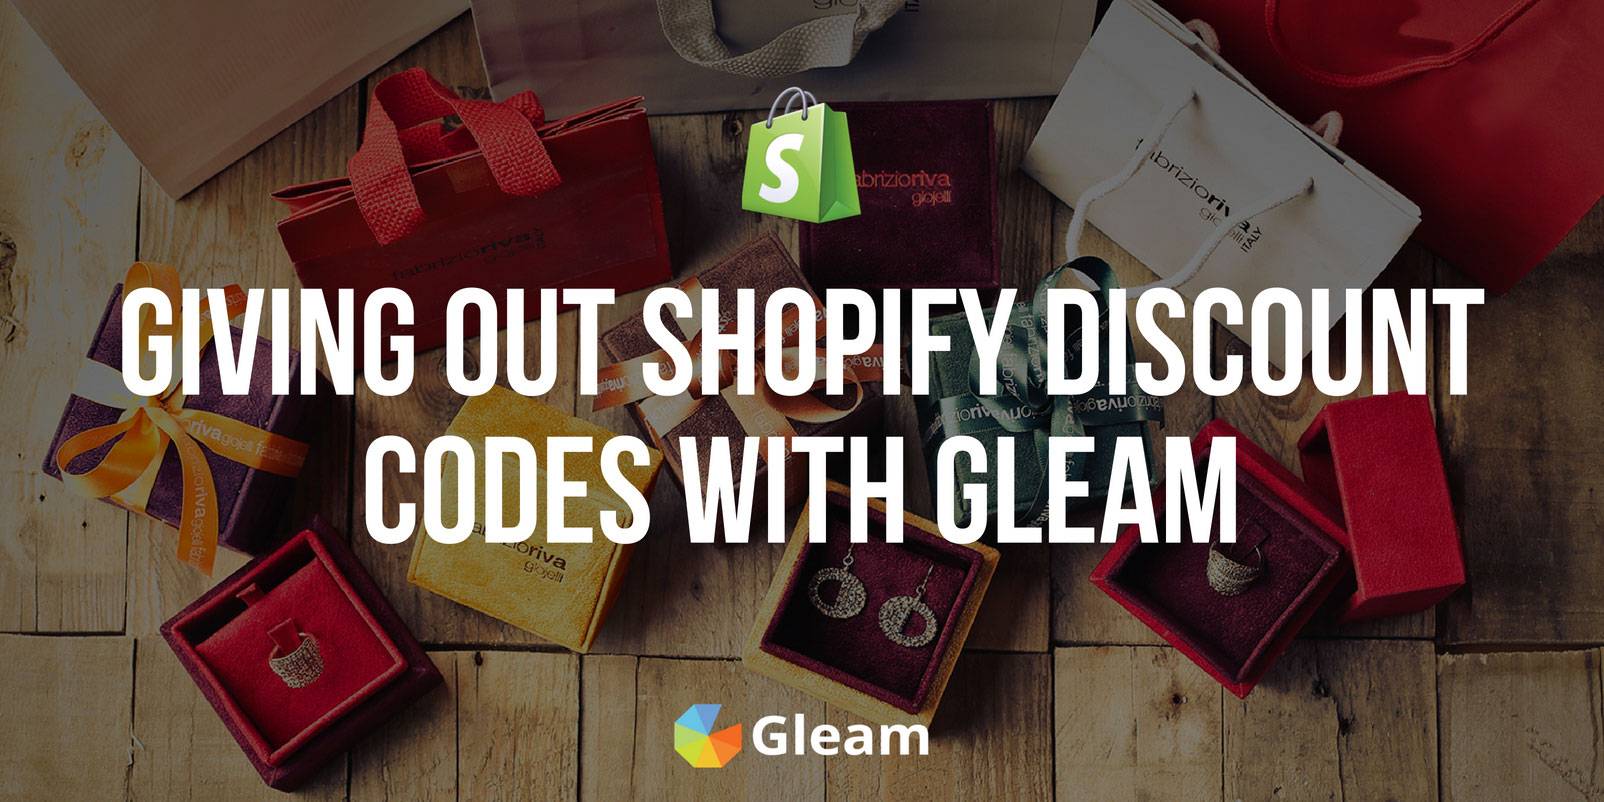 Give Out Shopify Discount Codes Guide